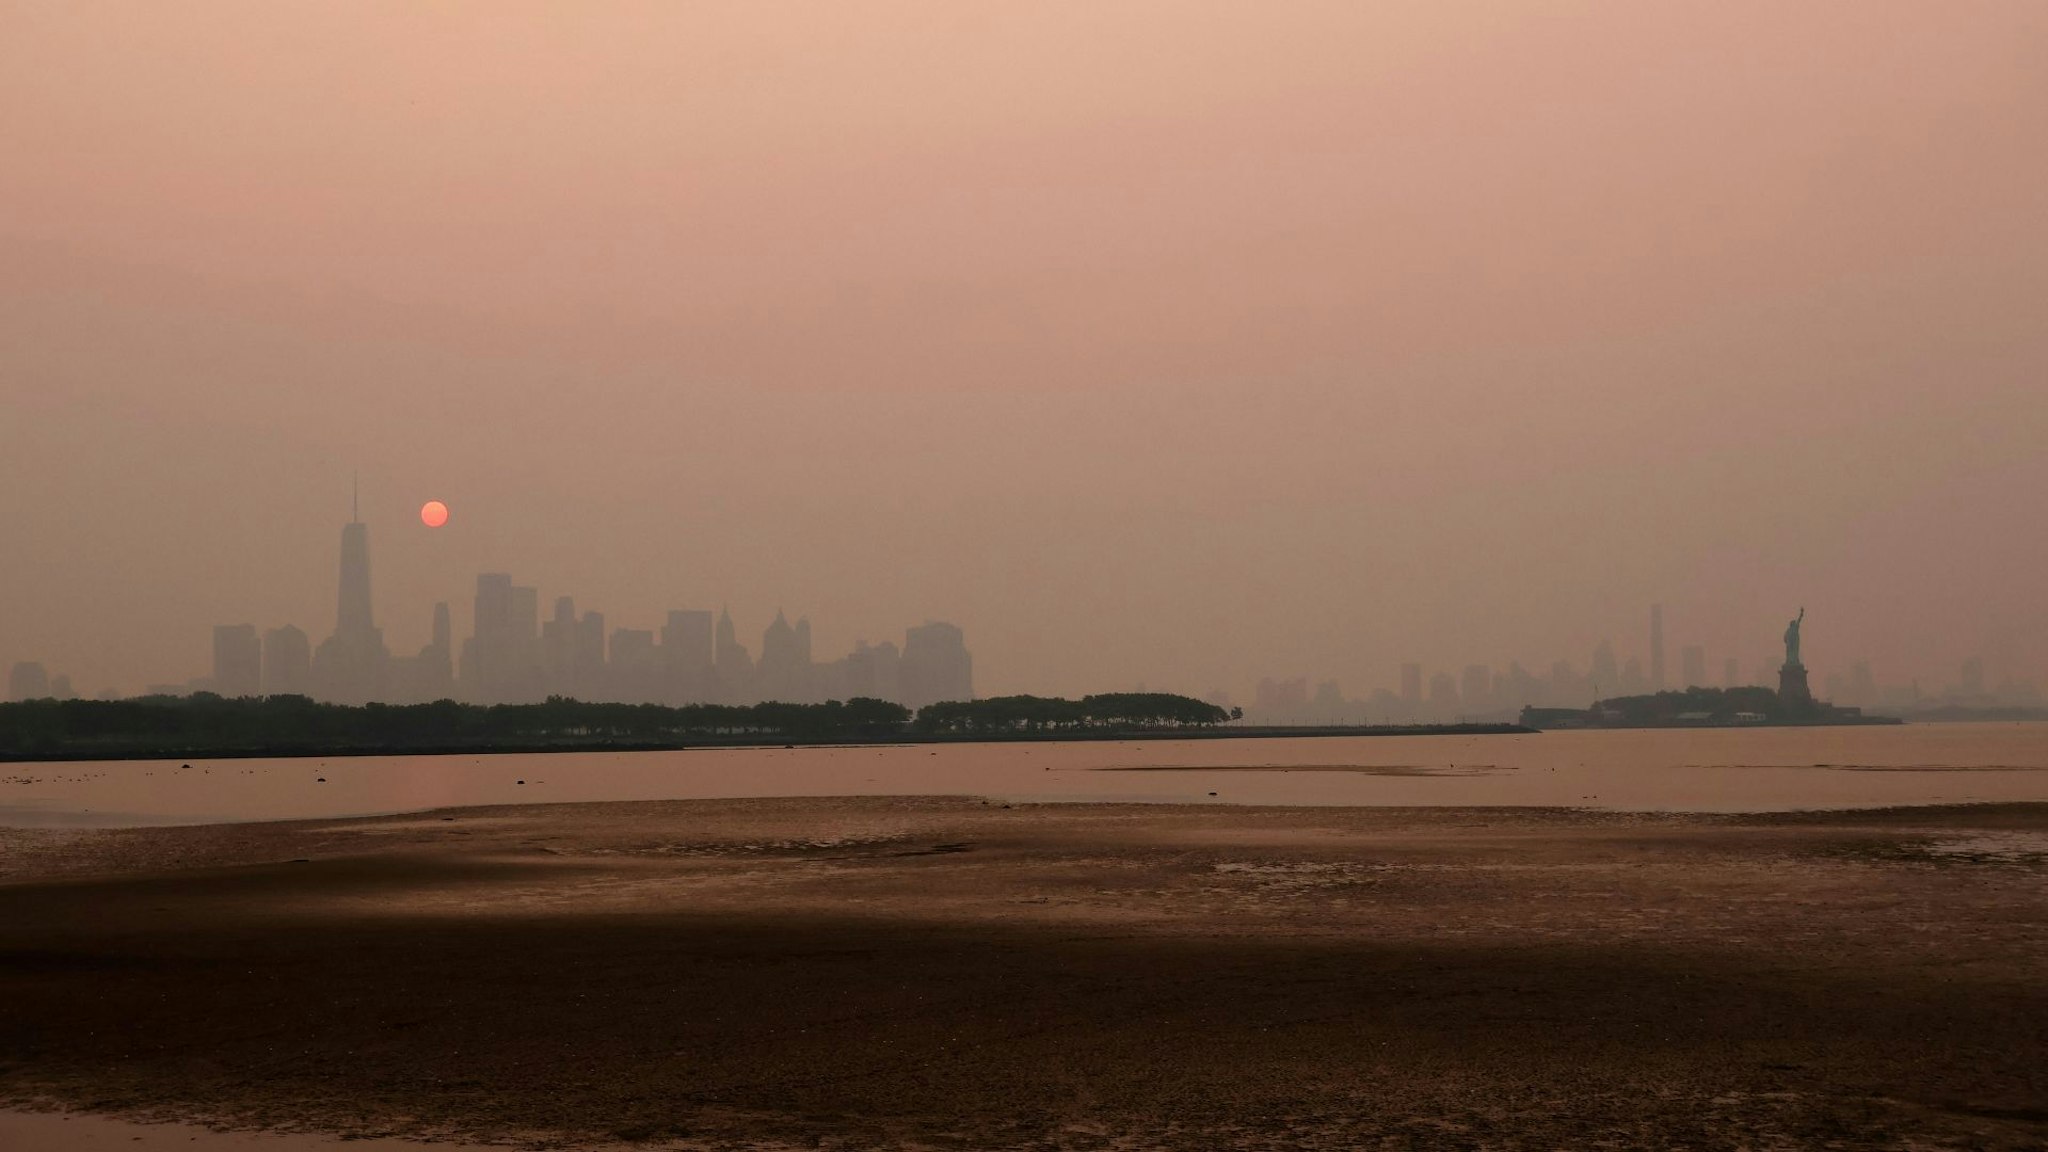 JERSEY CITY, NJ - JUNE 7: Smoke continues to shroud the sun as it rises behind the skyline of lower Manhattan, Brooklyn and the Statue of Liberty in New York City on June 7, 2023, as seen from Jersey City, New Jersey.